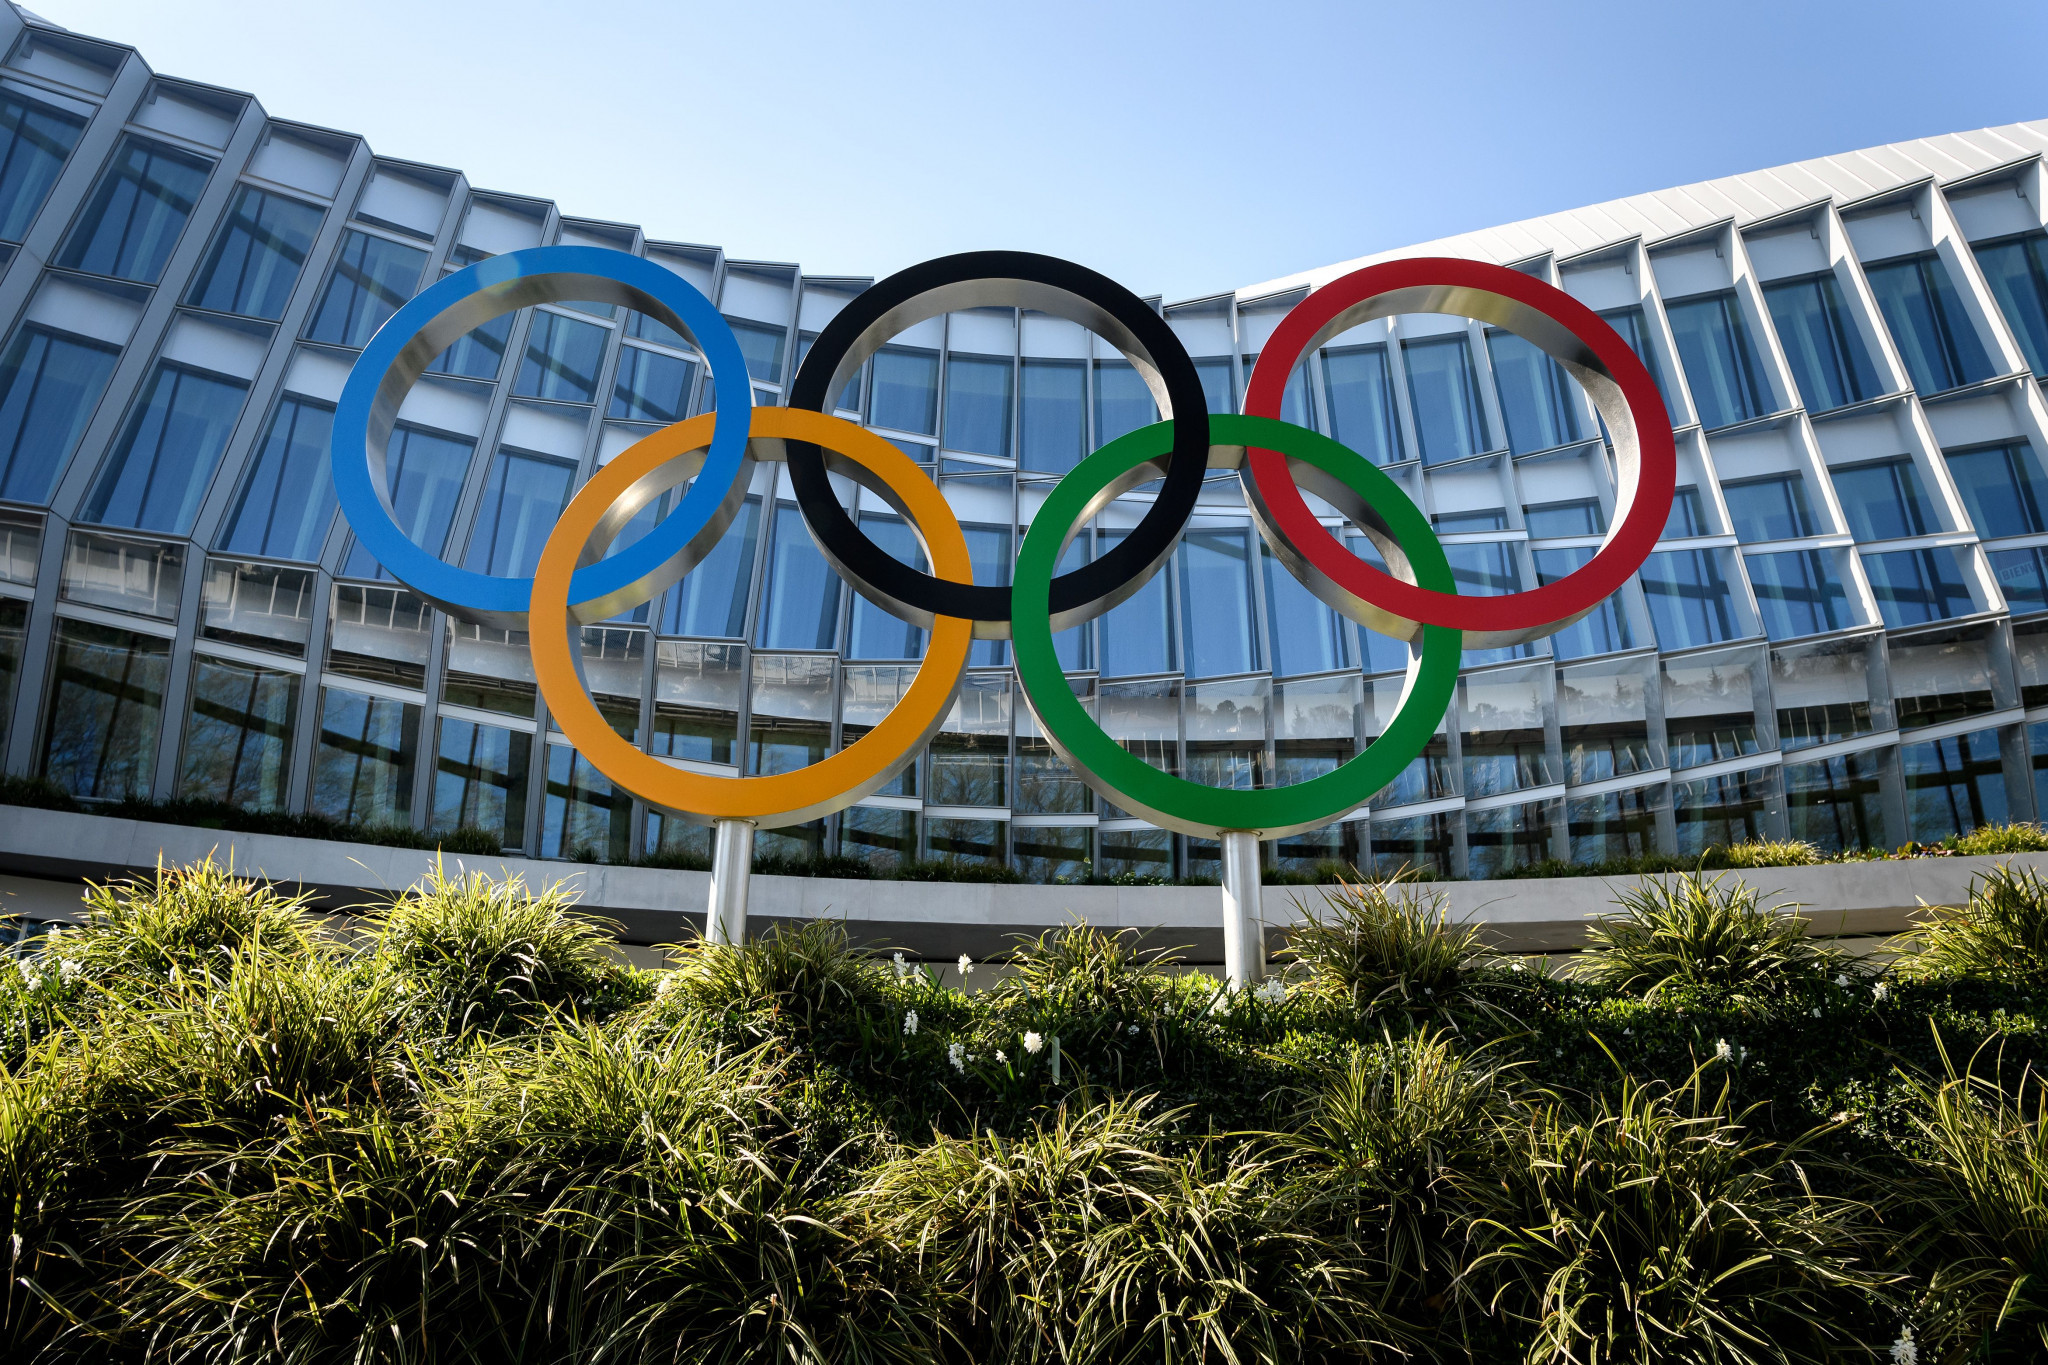 Marius Vizer Jr said FITEQ is "working hard" to secure recognition from the IOC ©Getty Images